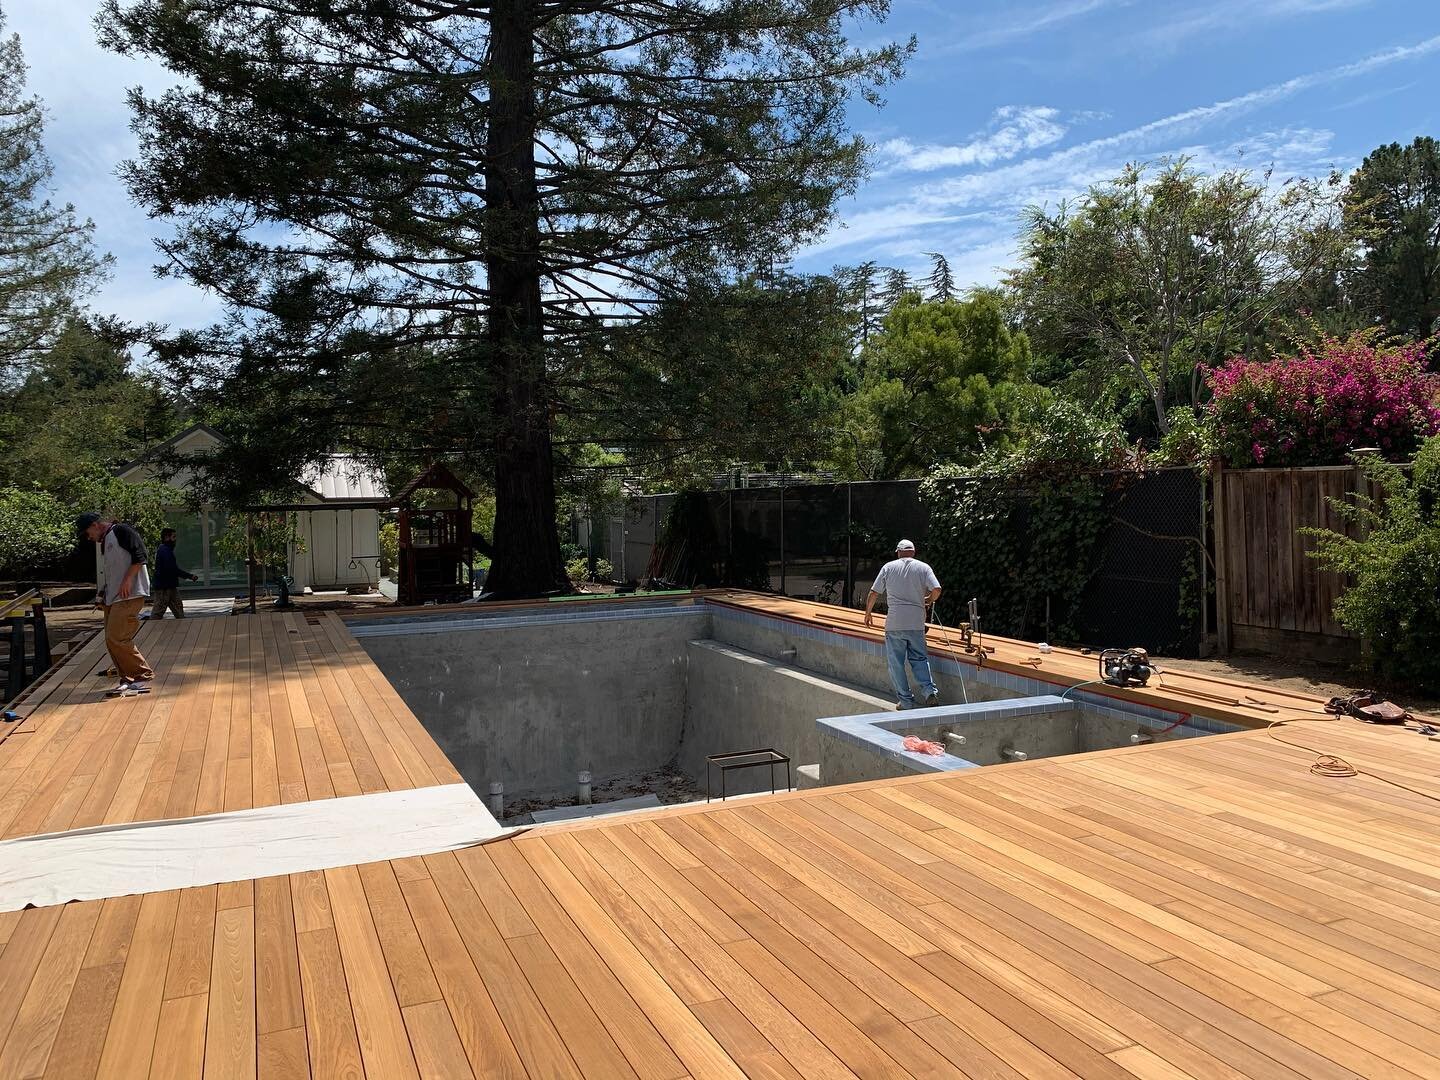 Can&rsquo;t wait for this teak deck to be completed! #sanmateo #teak #deck #pooldeck #truscapeslc #arterrasf #landscapeconstruction #carpentry